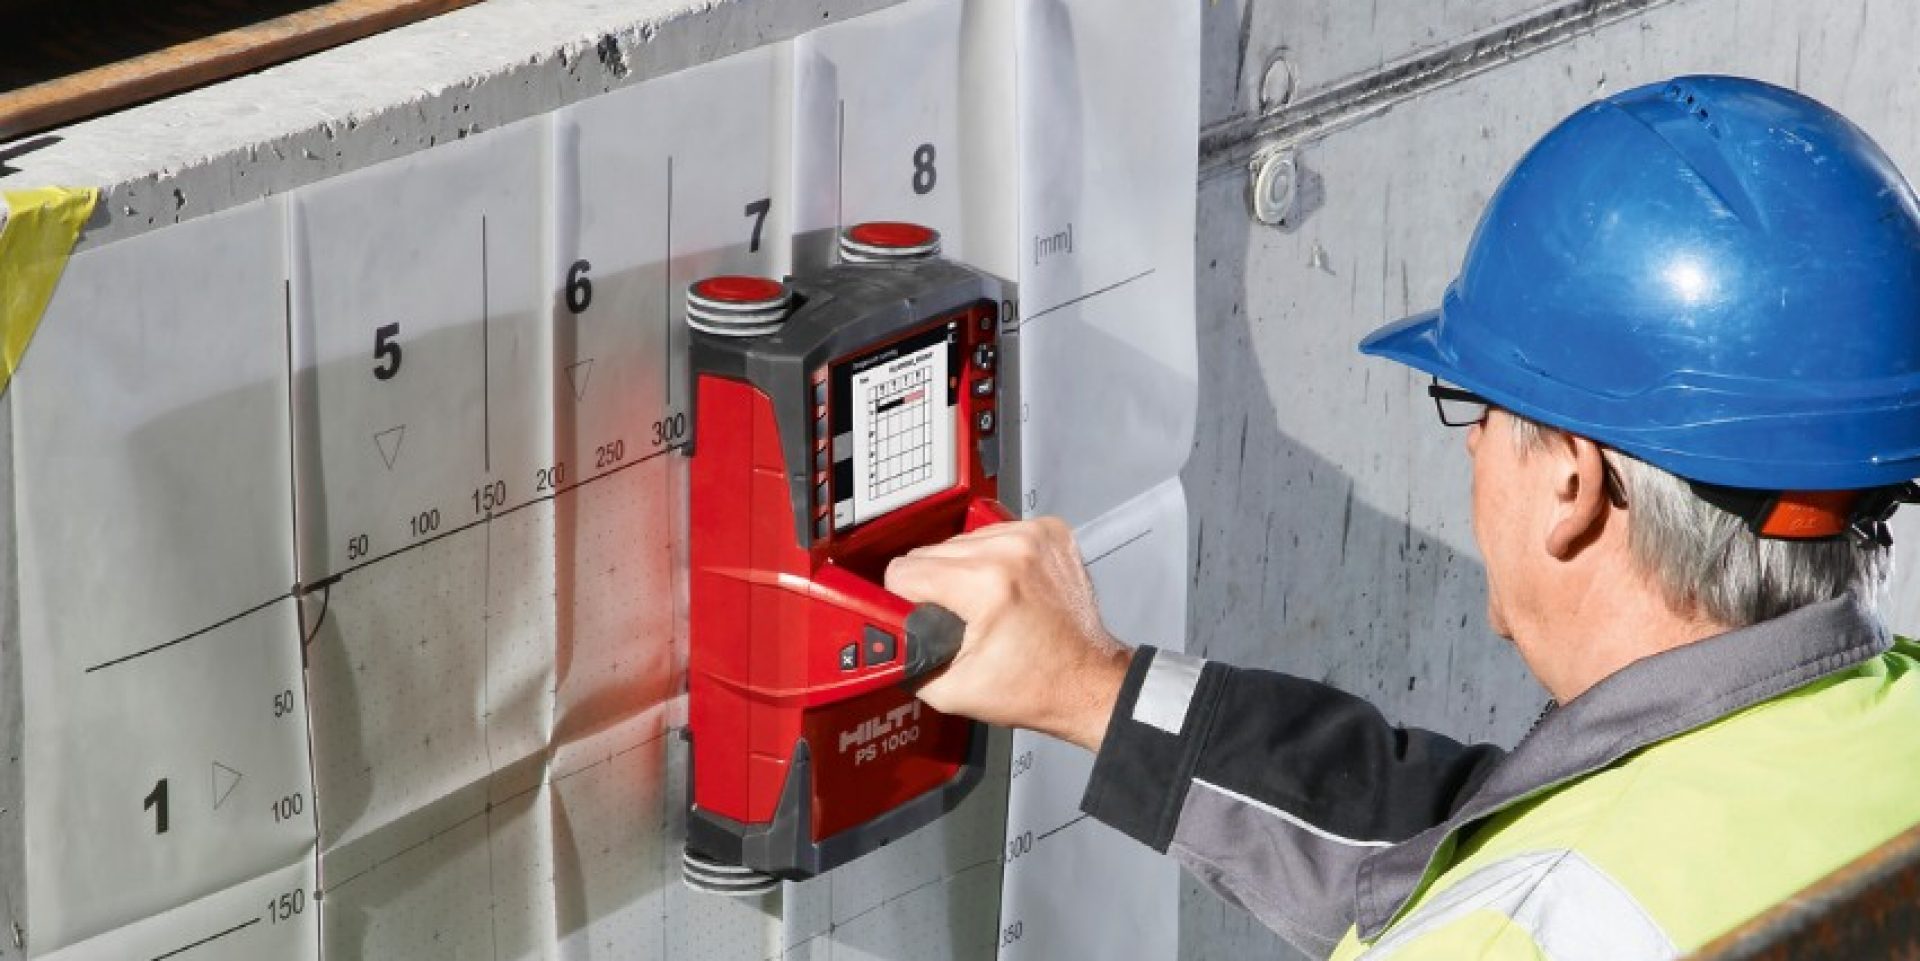 Structural analysis with Hilti PS 1000 concrete scanner and rebar detector